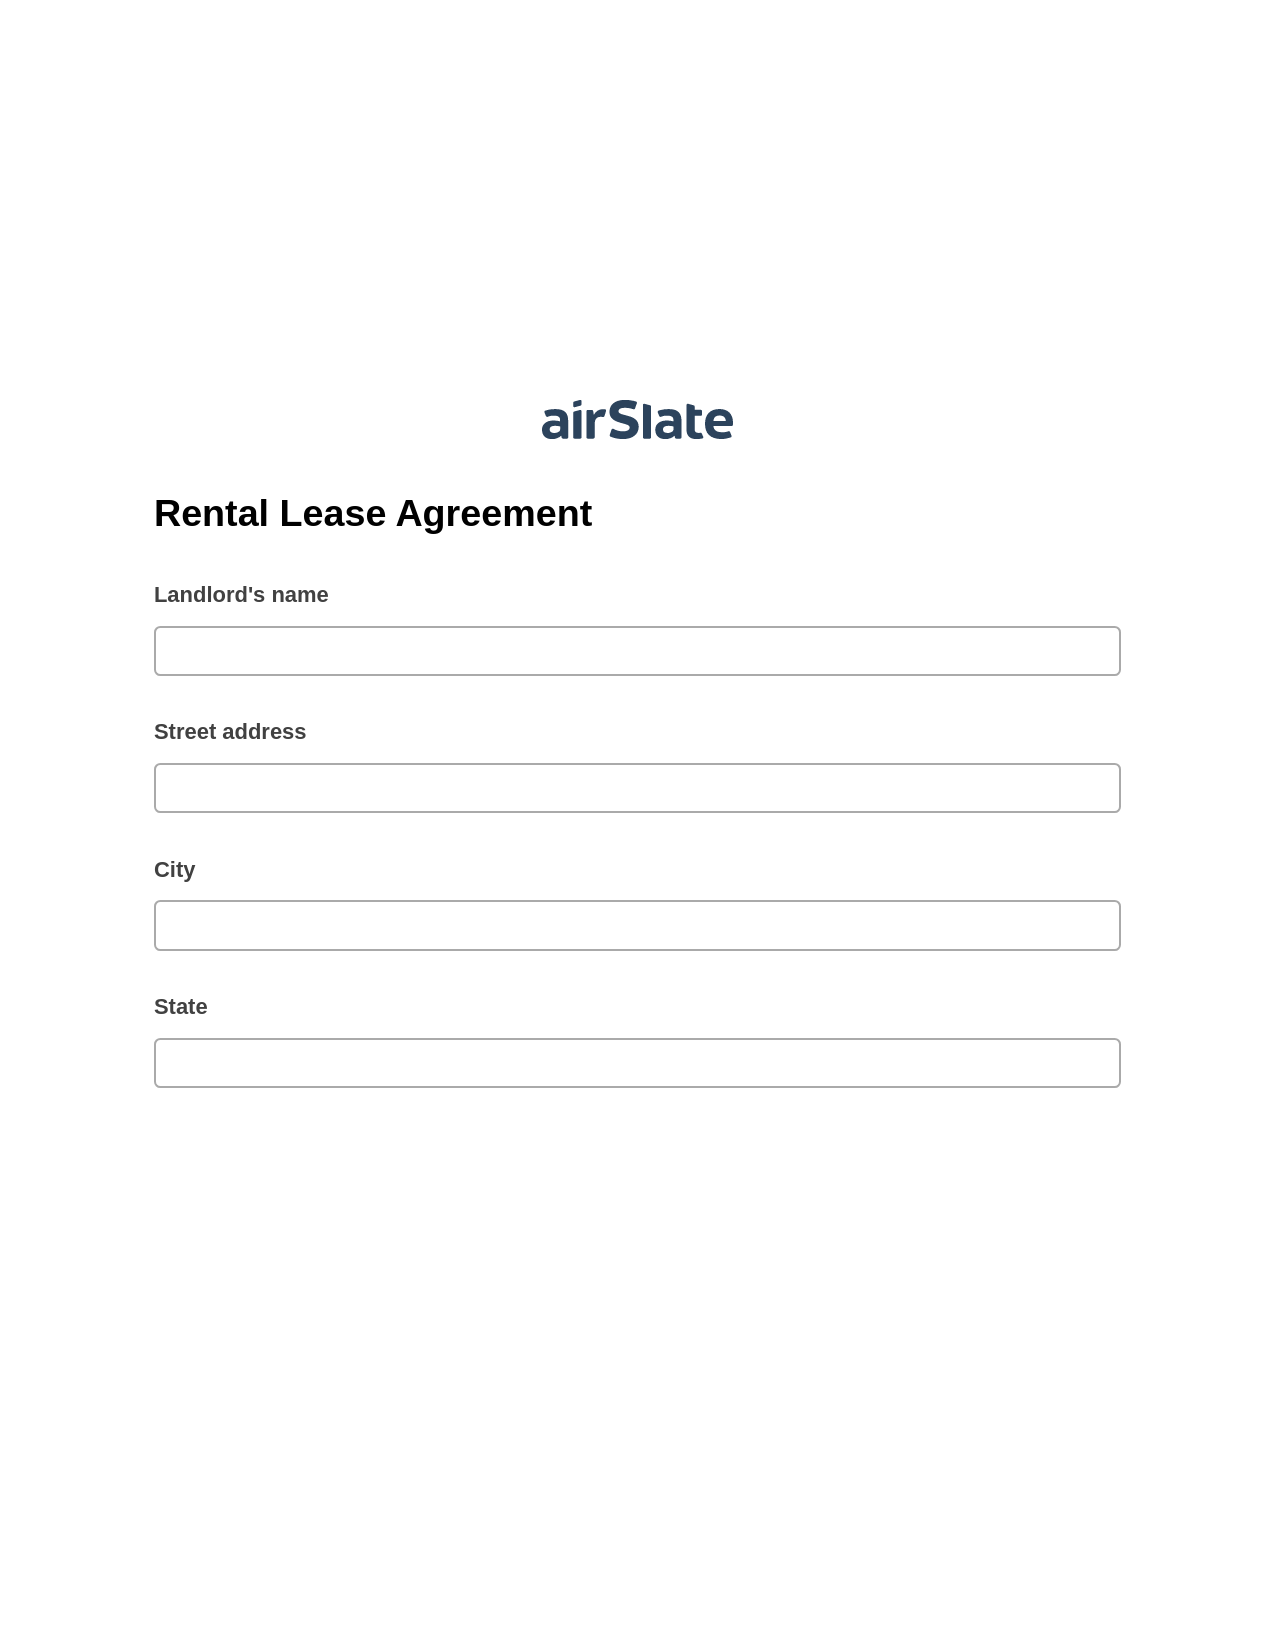 Multirole Rental Lease Agreement Pre-fill from CSV File Dropdown Options Bot, Assign Slate Name Bot, Export to Excel 365 Bot